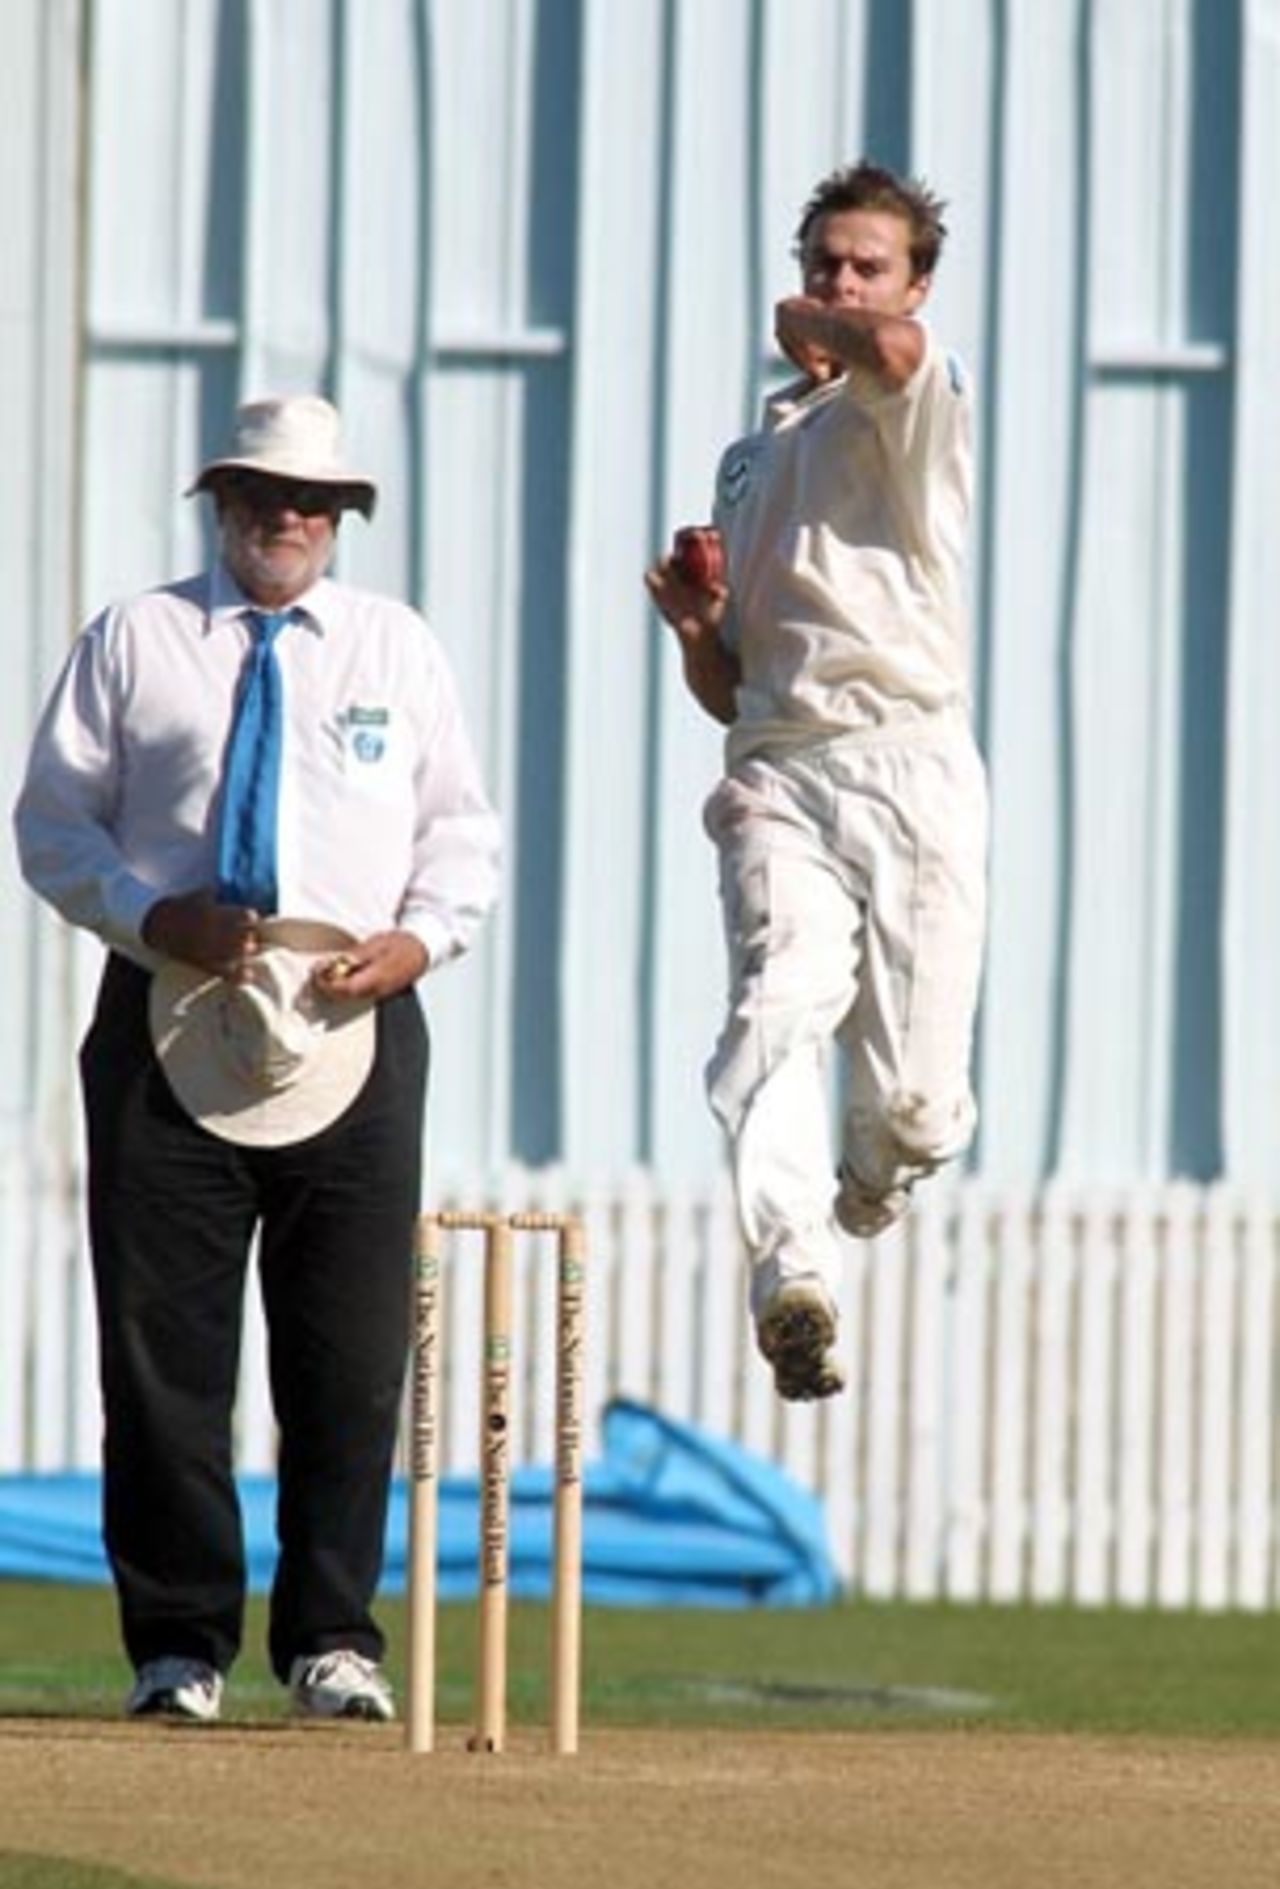 New Zealand bowler Chris Martin leaps as he is about to deliver a ball during his second innings spell of 1-6 from four overs. Umpire David Orchard from South Africa looks on. 1st Test: New Zealand v Bangladesh at WestpacTrust Park, Hamilton, 18-22 Dec 2001 (21 December 2001).